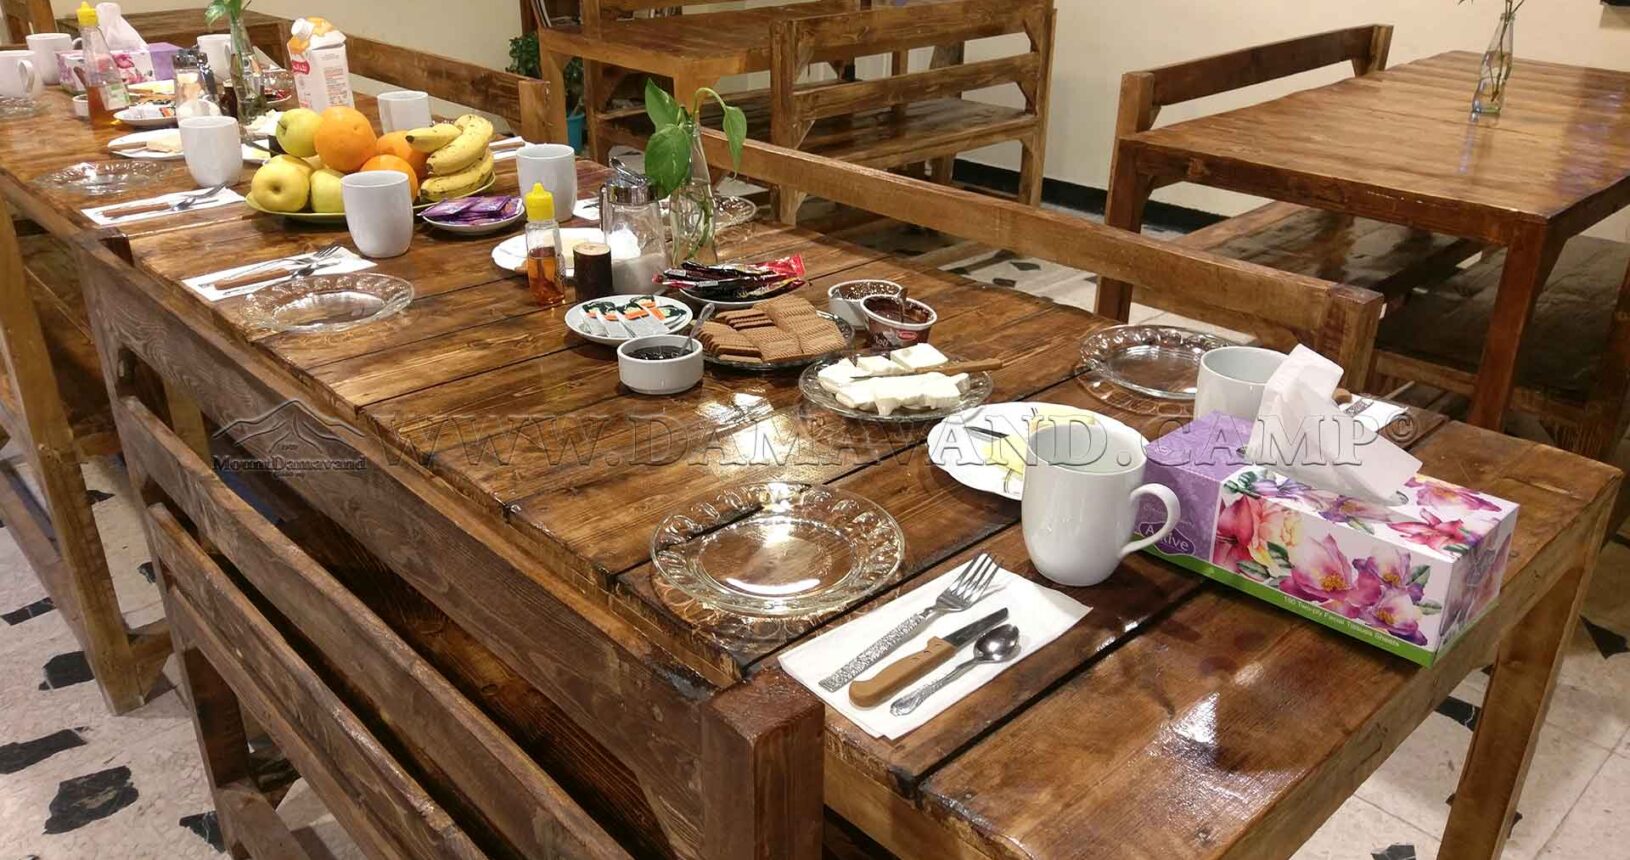 Meal Service at Camp 1 (Rineh) of Mount Damavand